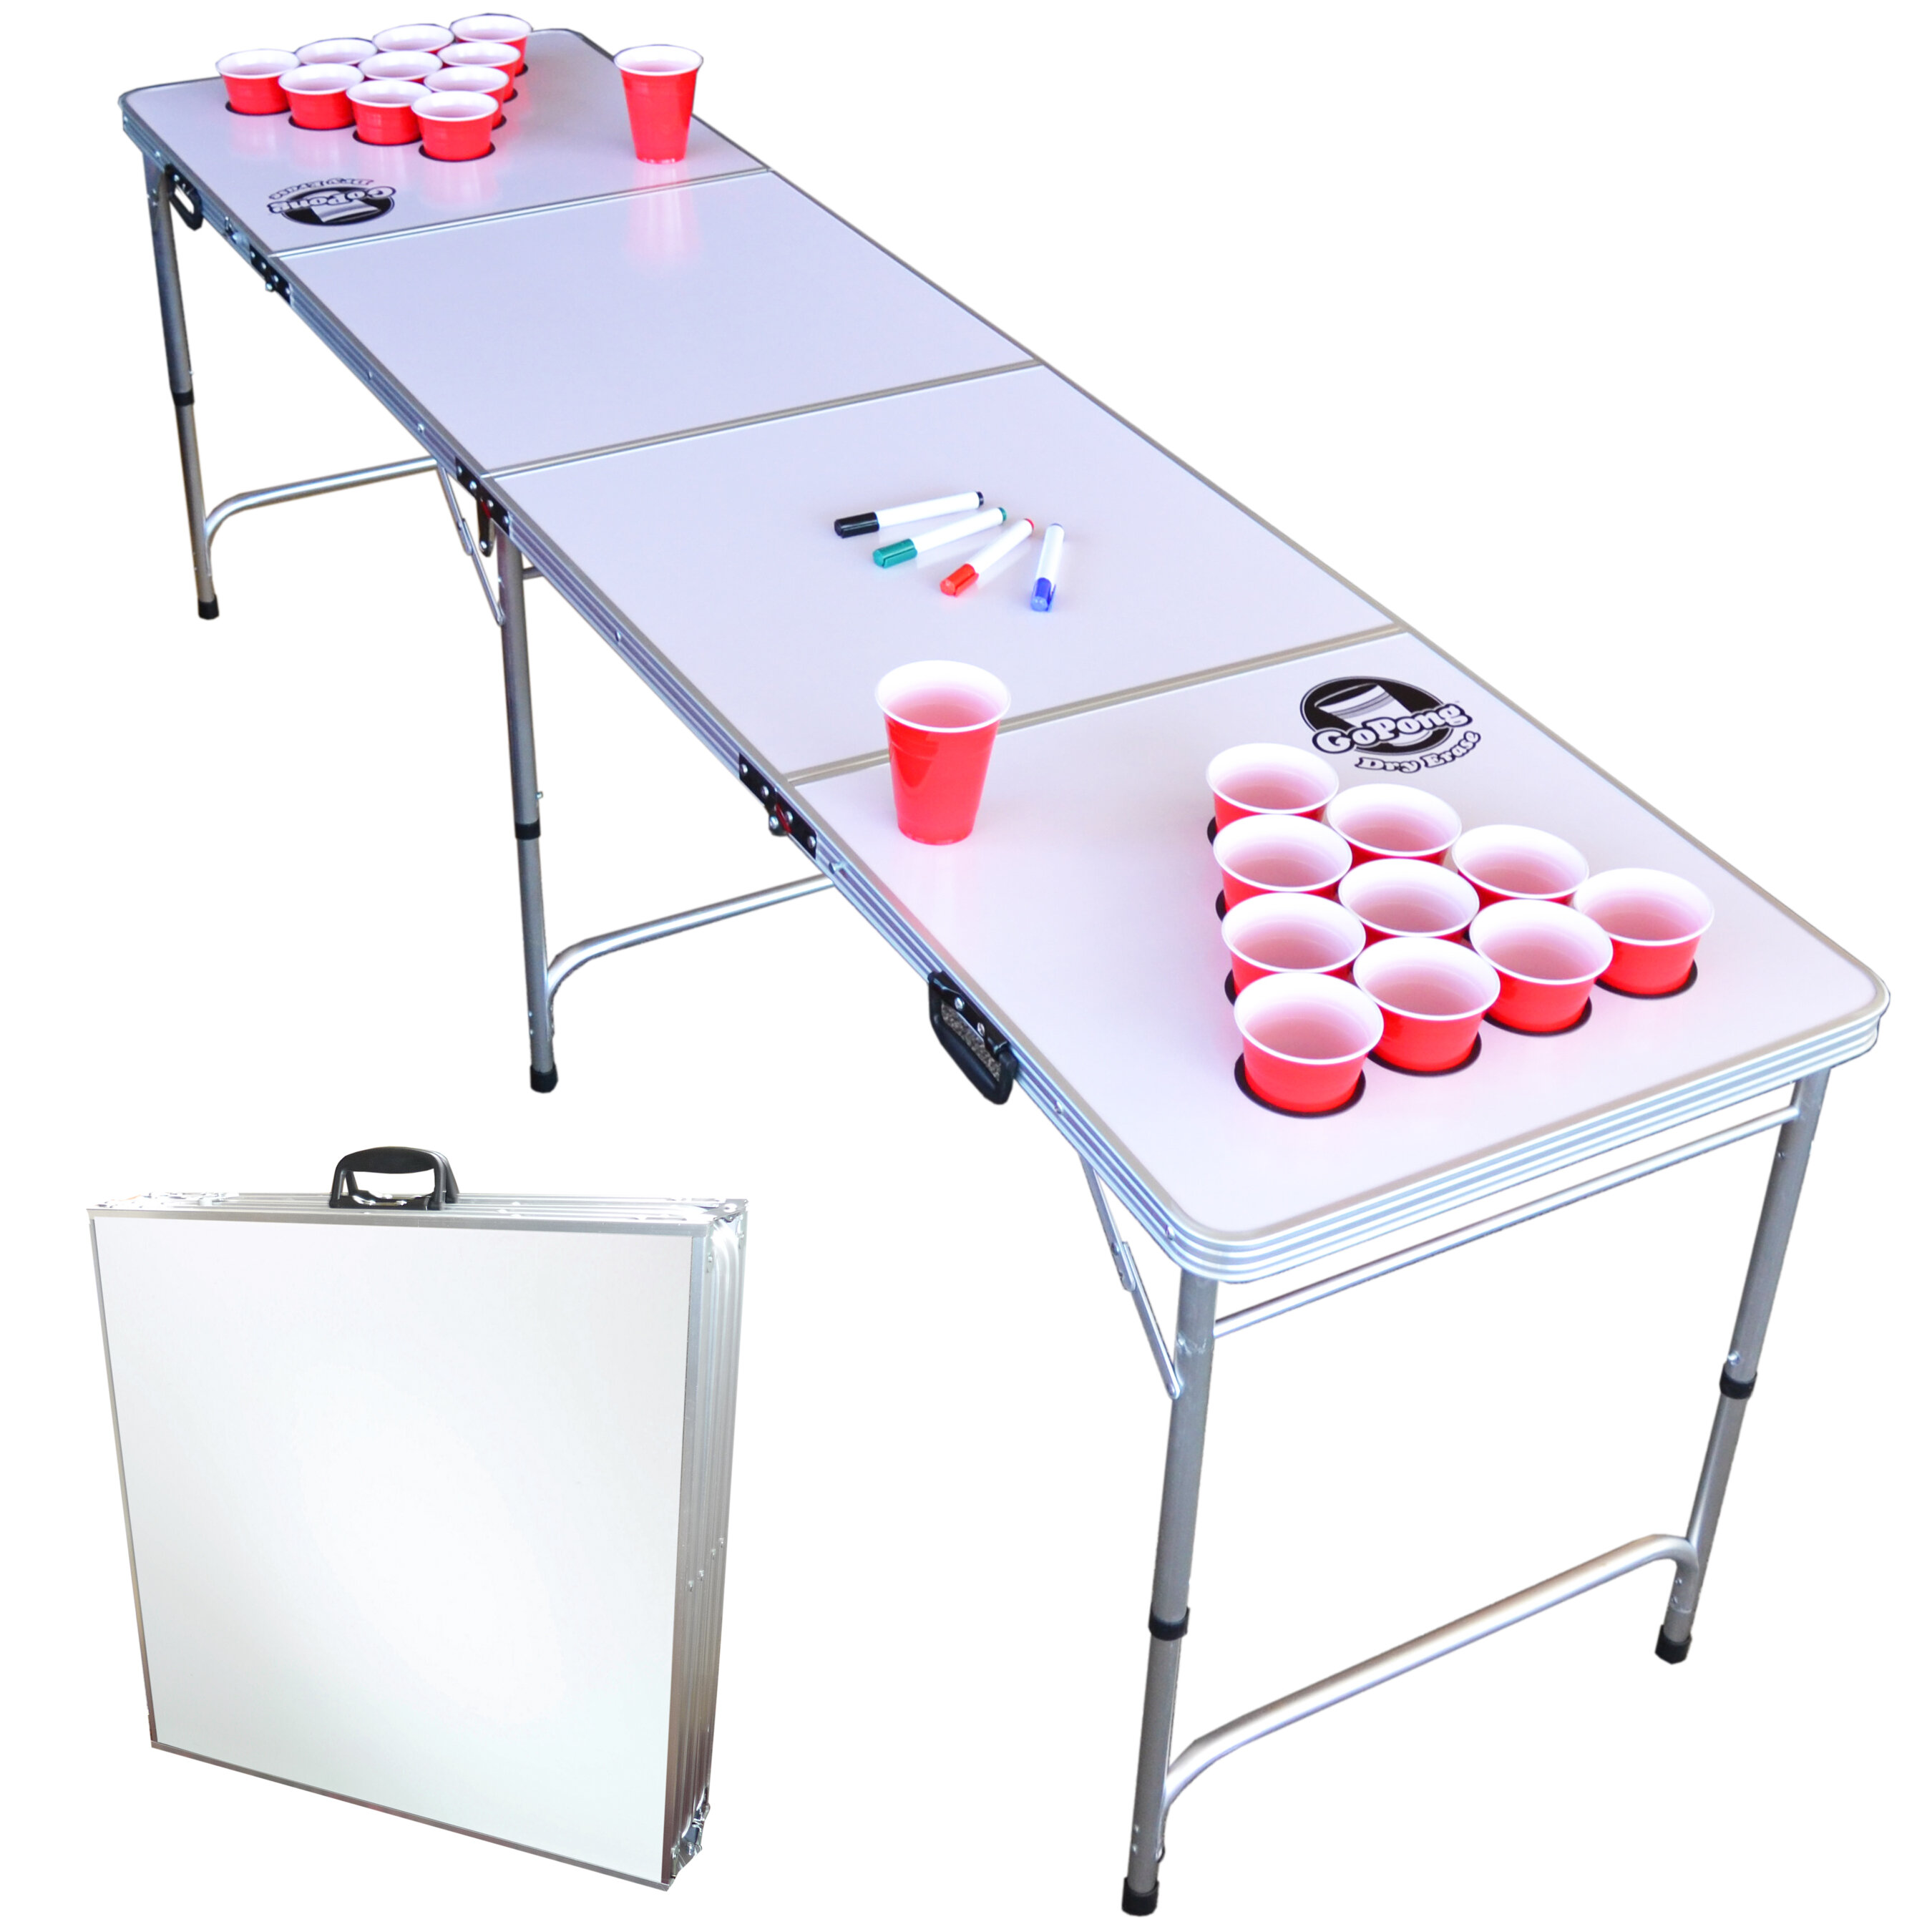 GoPong 6' Portable Folding Beer Pong Table